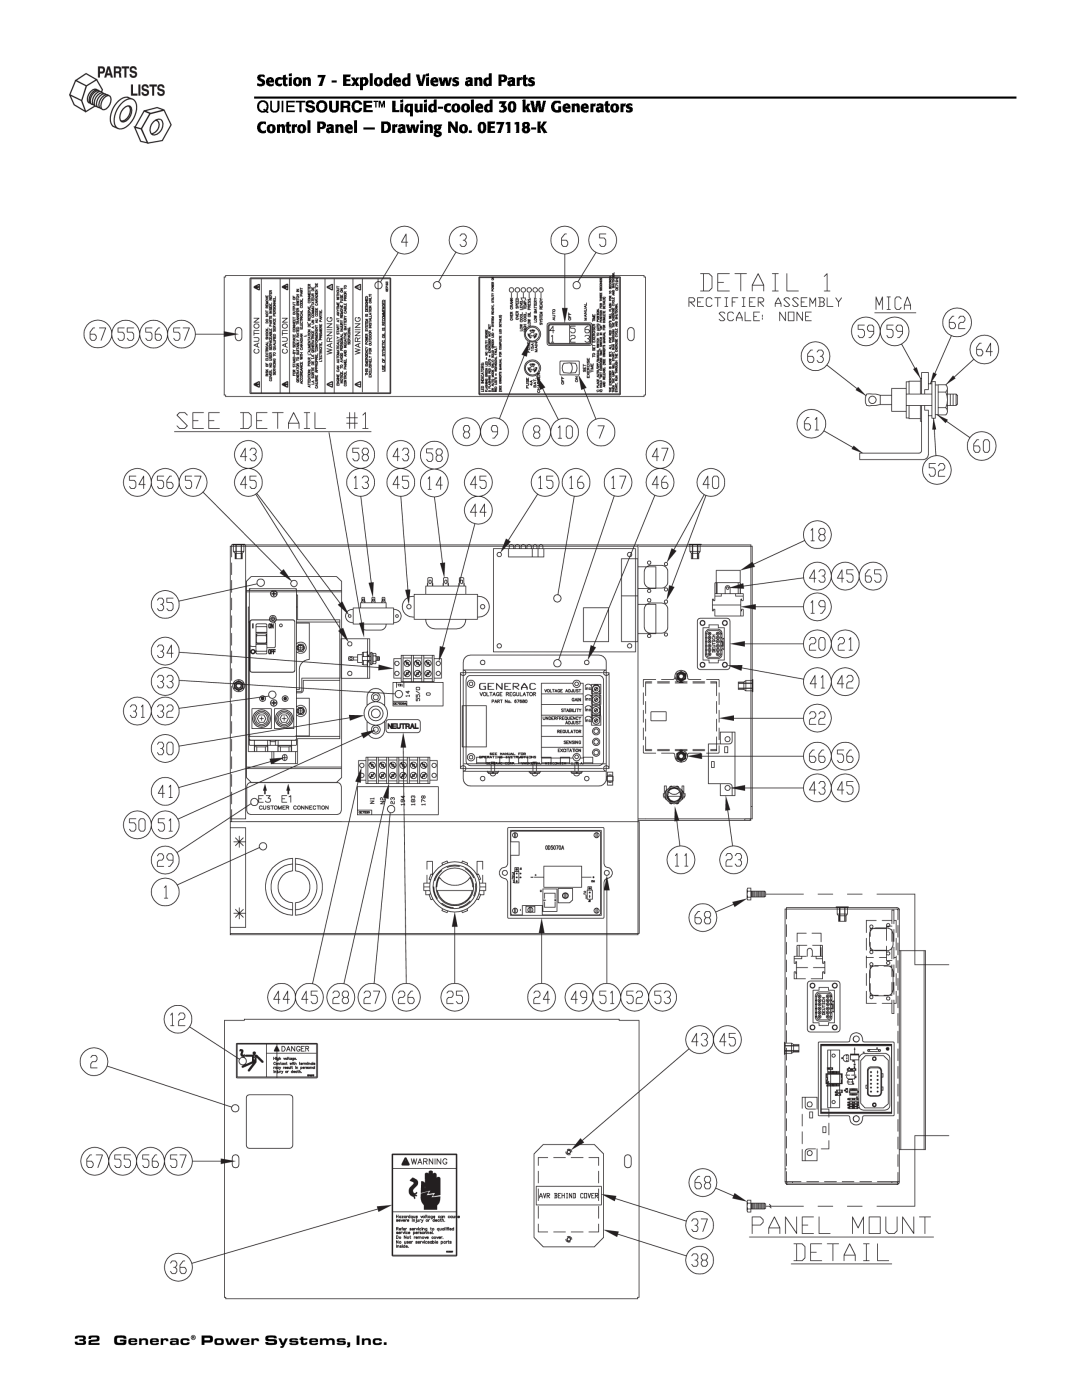 Generac Power Systems 004917-3 owner manual Exploded Views and Parts, Generac Power Systems, Inc 